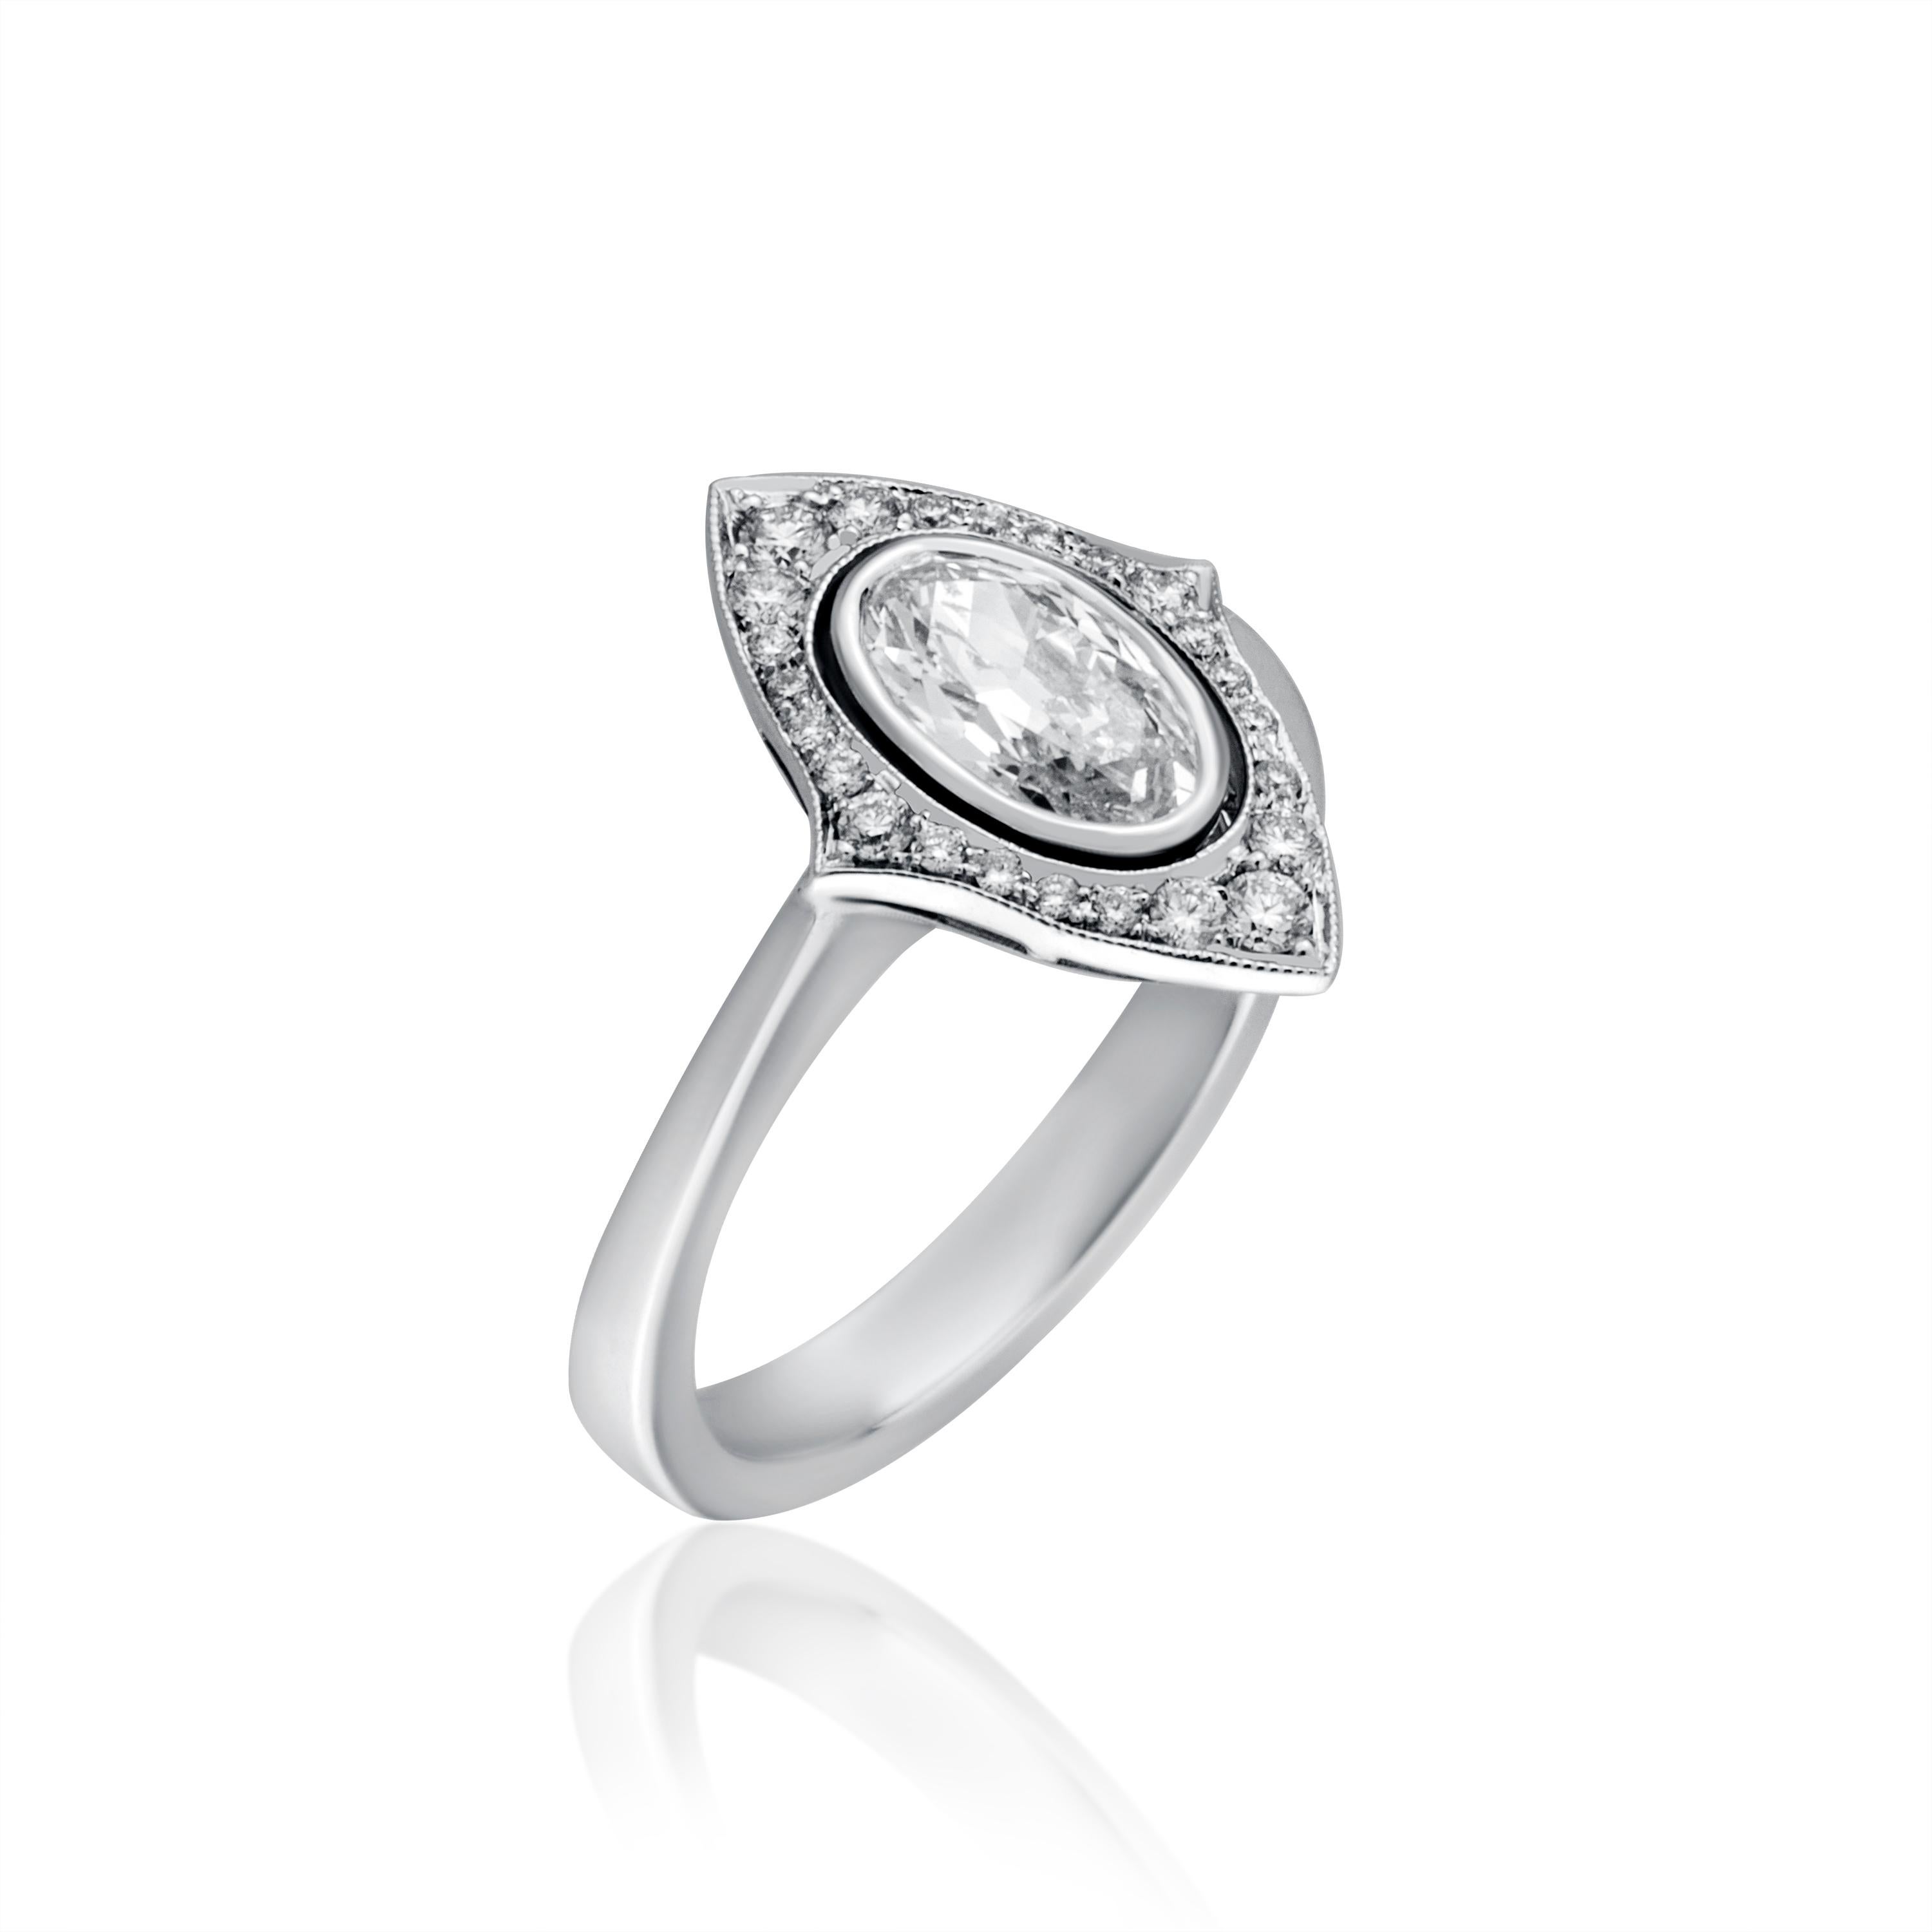 This Beautiful Bridal Ring Features 0.82 Carat Old Cut Oval Diamond In Center Surrounded by 0.18 Carat Small Brilliant Cut Diamonds. Total 1.00 Carat Diamonds Set in 4.70 Gram 18 Karat White Gold.
This Ring Is Made by Hand in Istanbul and